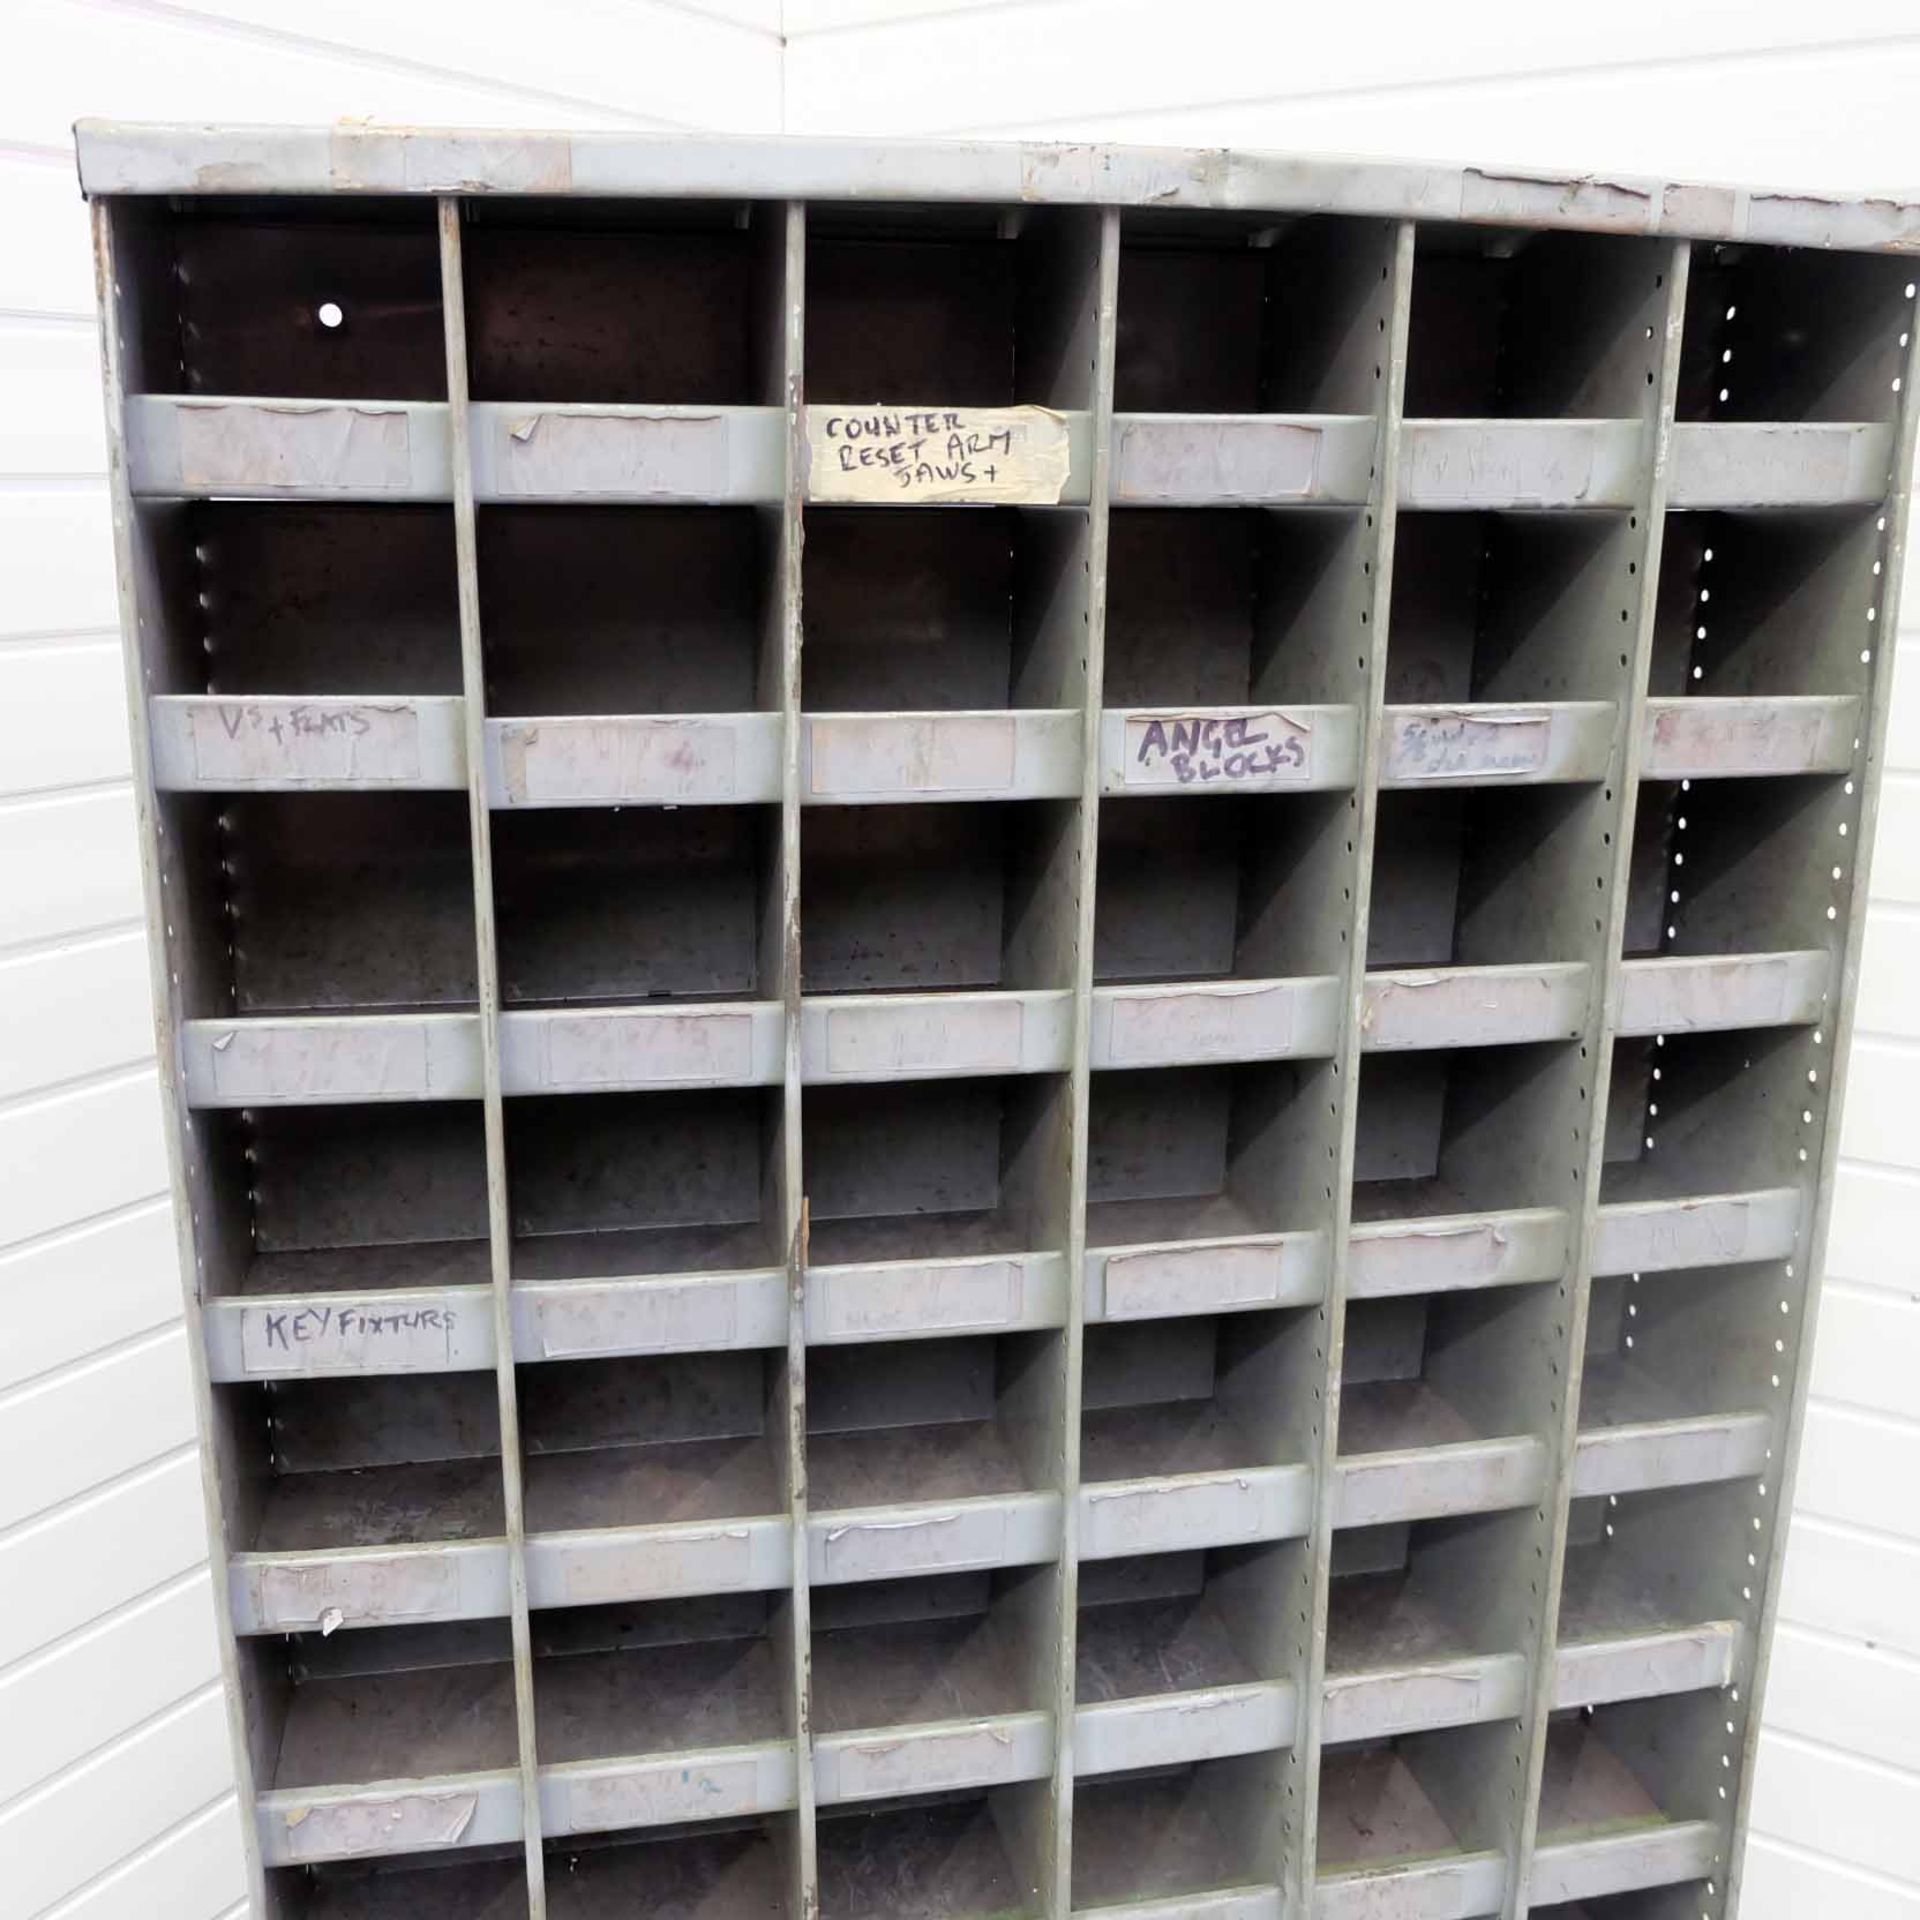 Set of Steel Pigeon Holes. 78 Compartments. Size 36" x 8 3/4" x 72" High. - Image 3 of 4